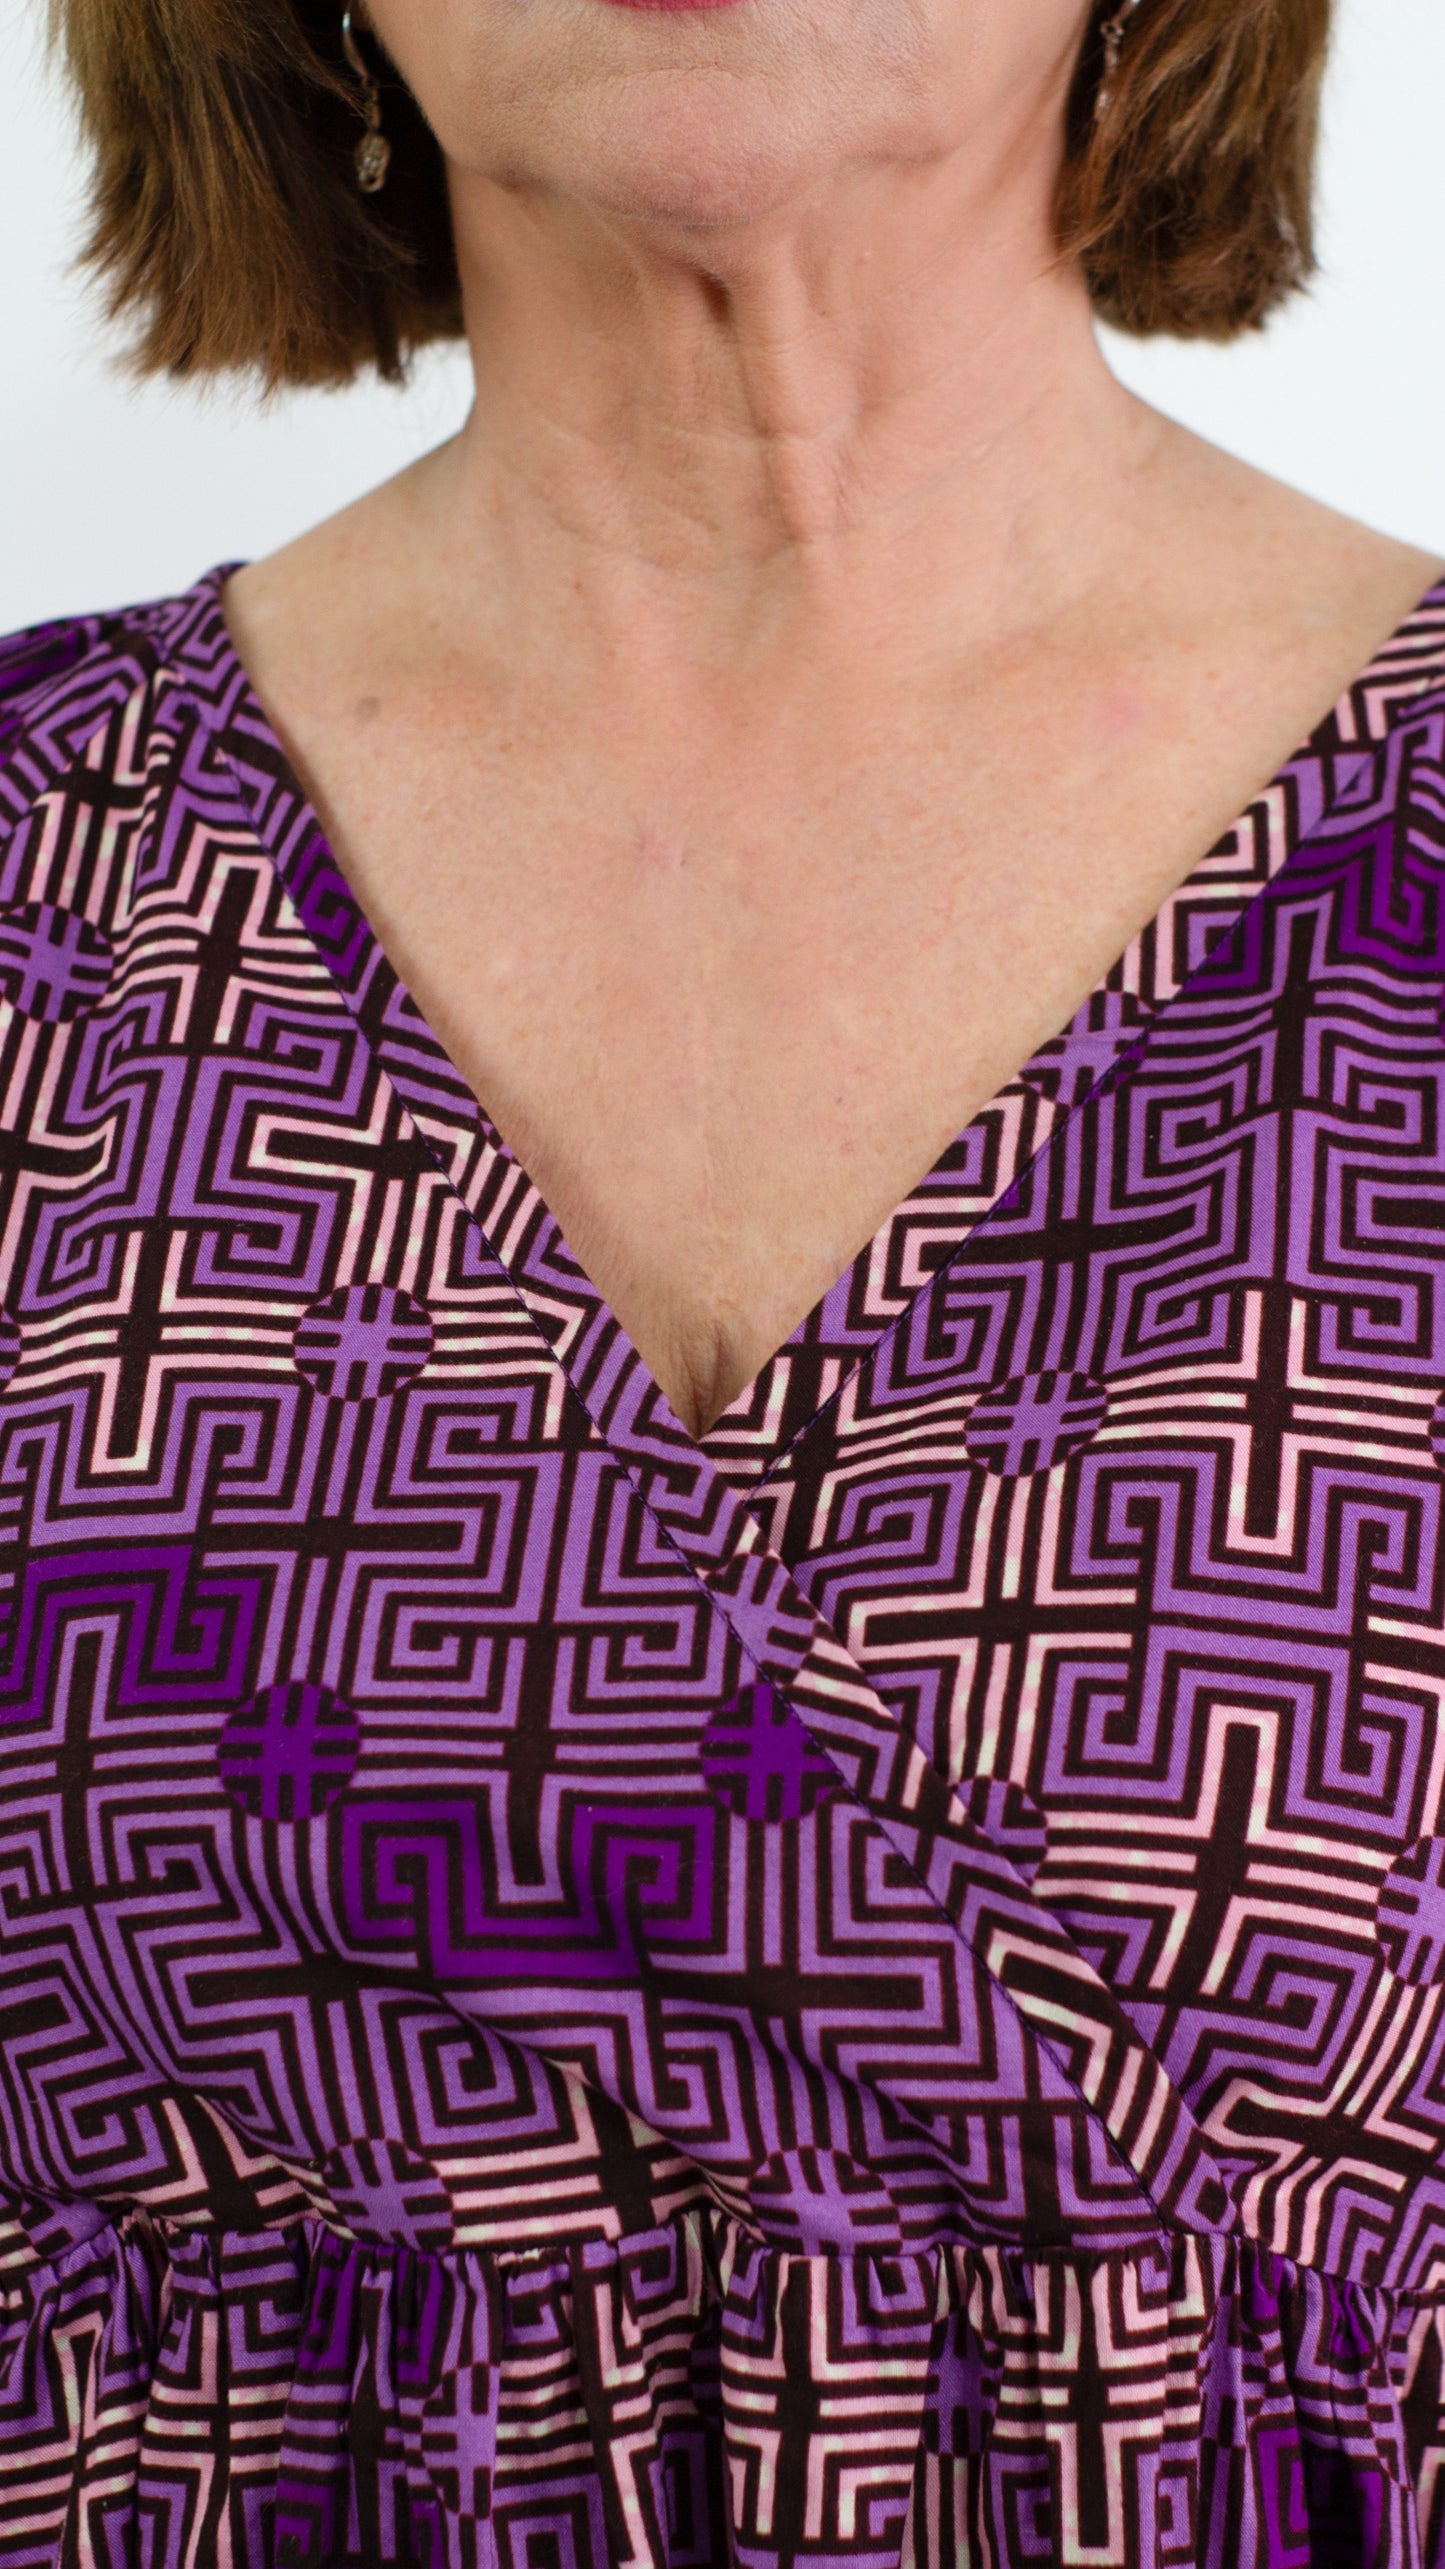 A close-up highlighting the neckline of the purple ruffle dress, showcasing the seamless blend of playful design elements and a feminine silhouette.